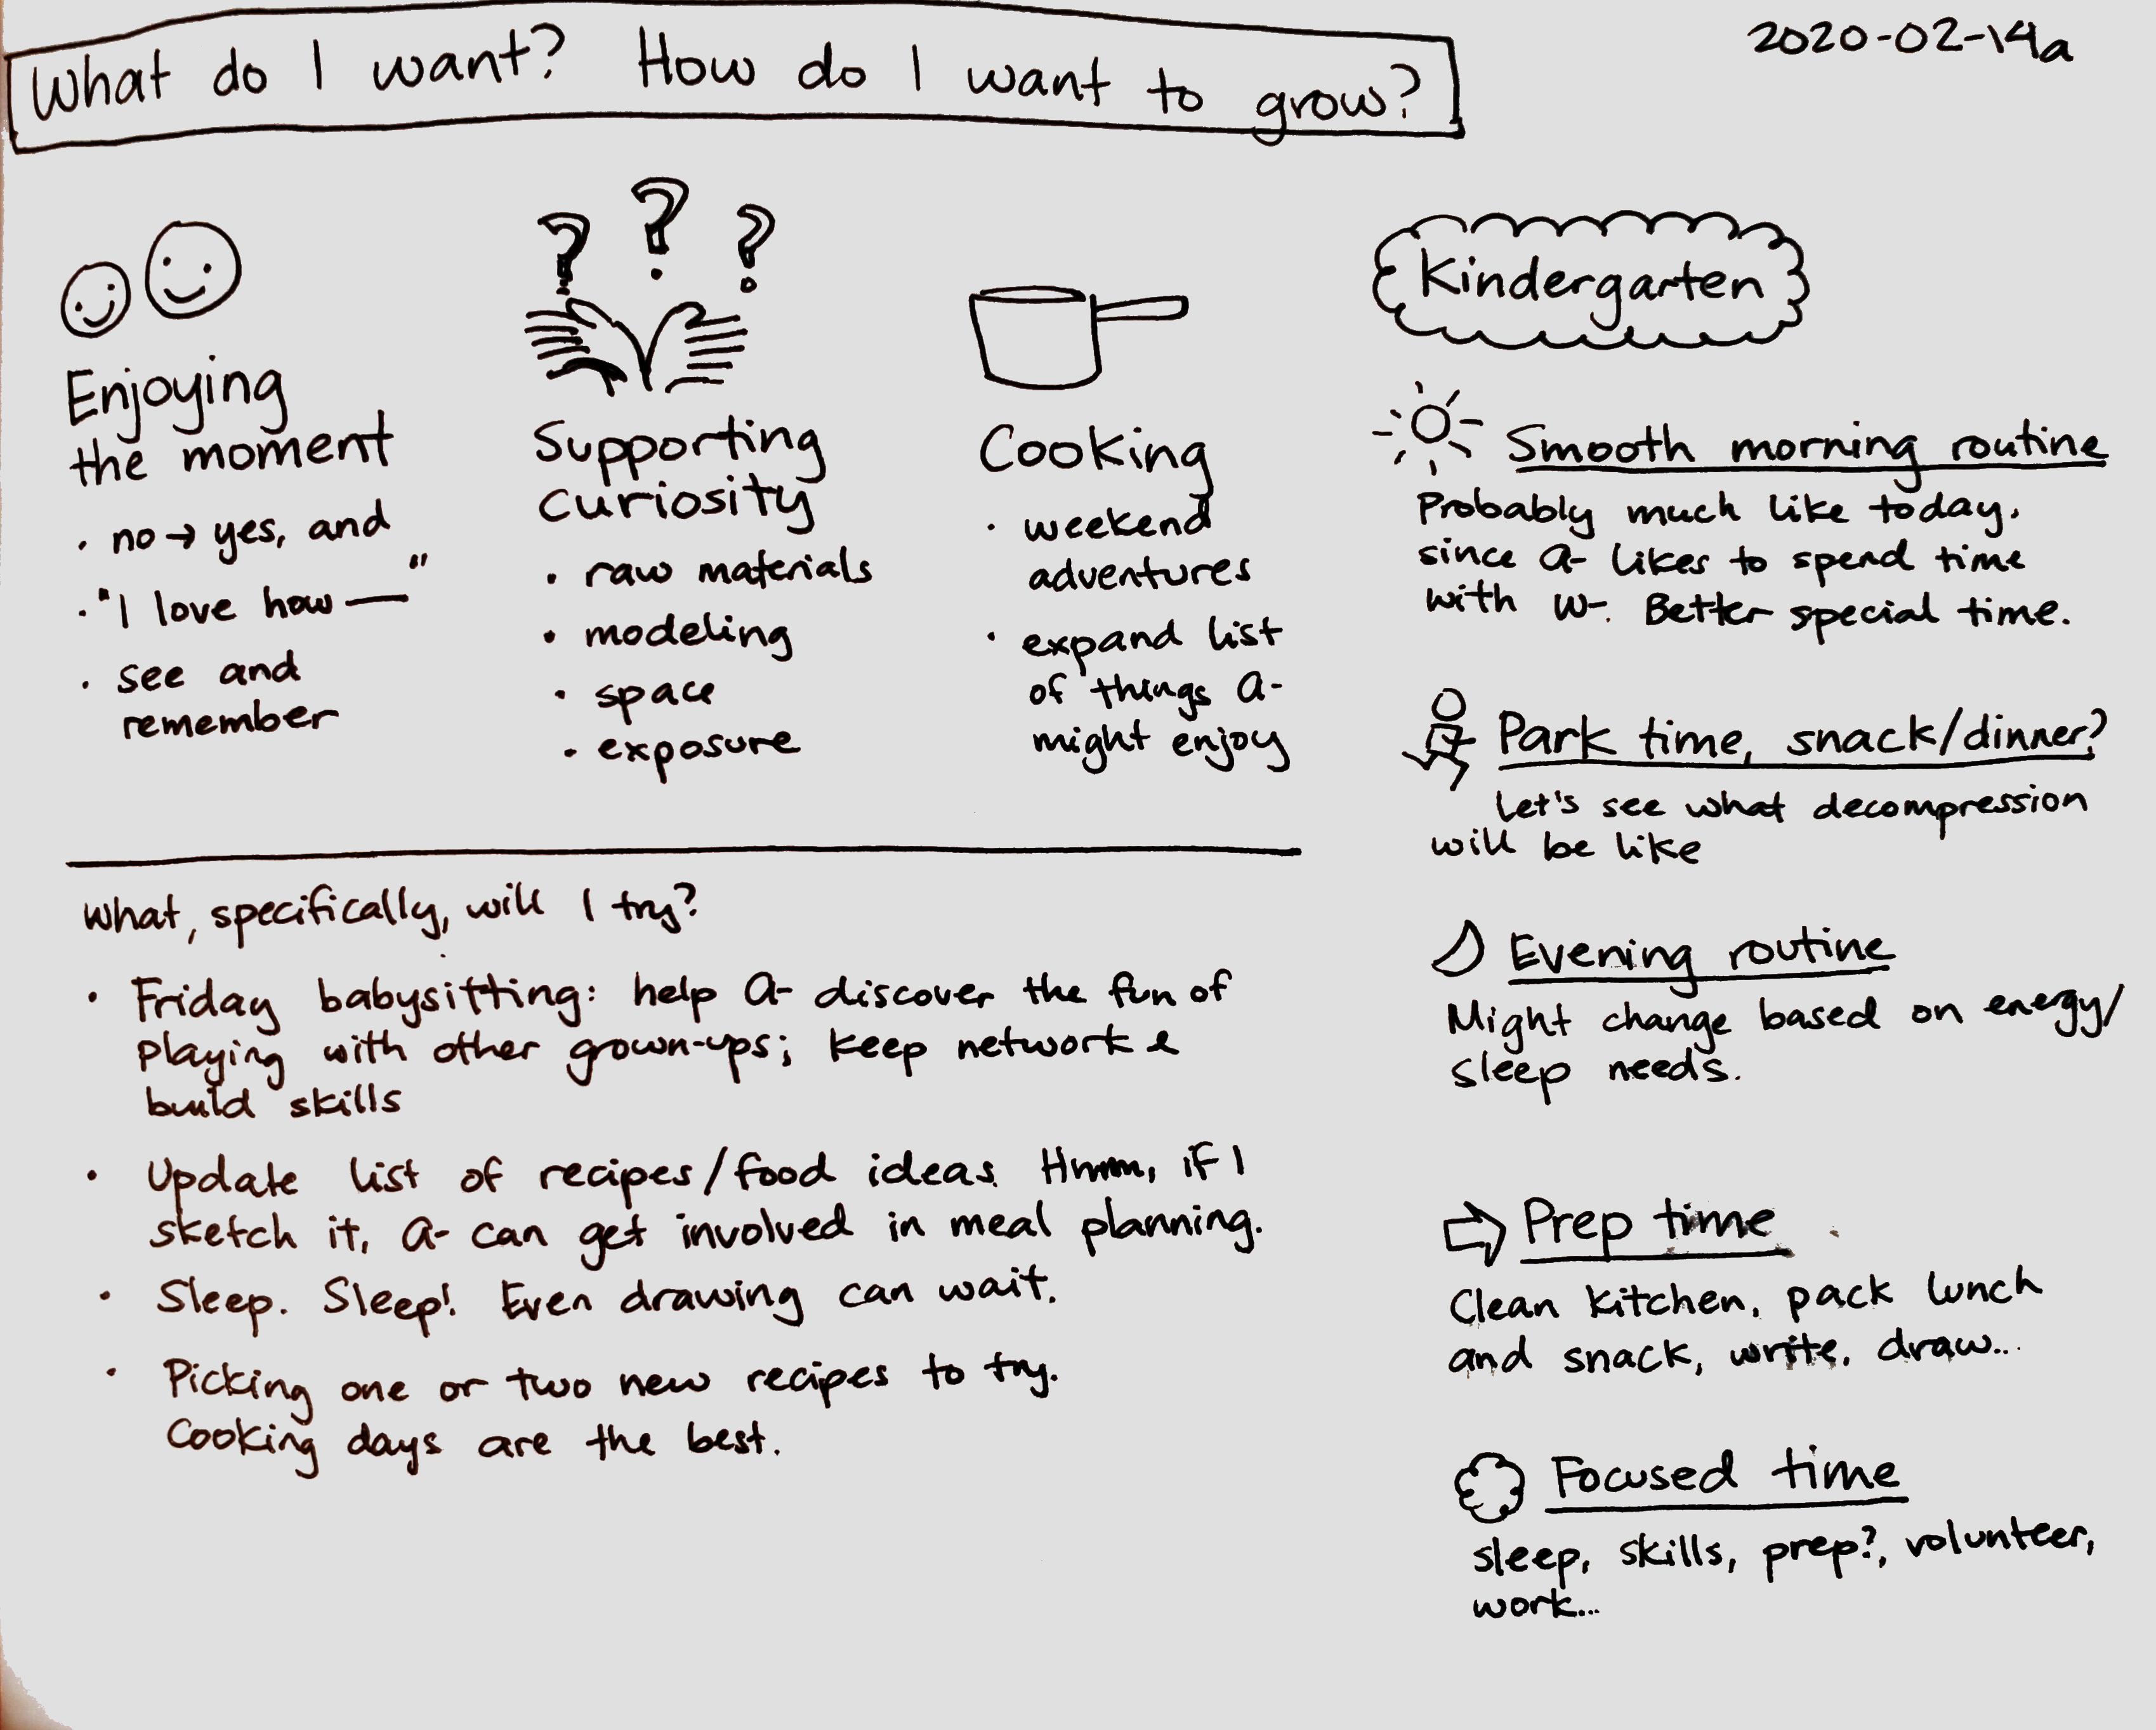 2020-02-14 How do I want to grow #kaizen.png